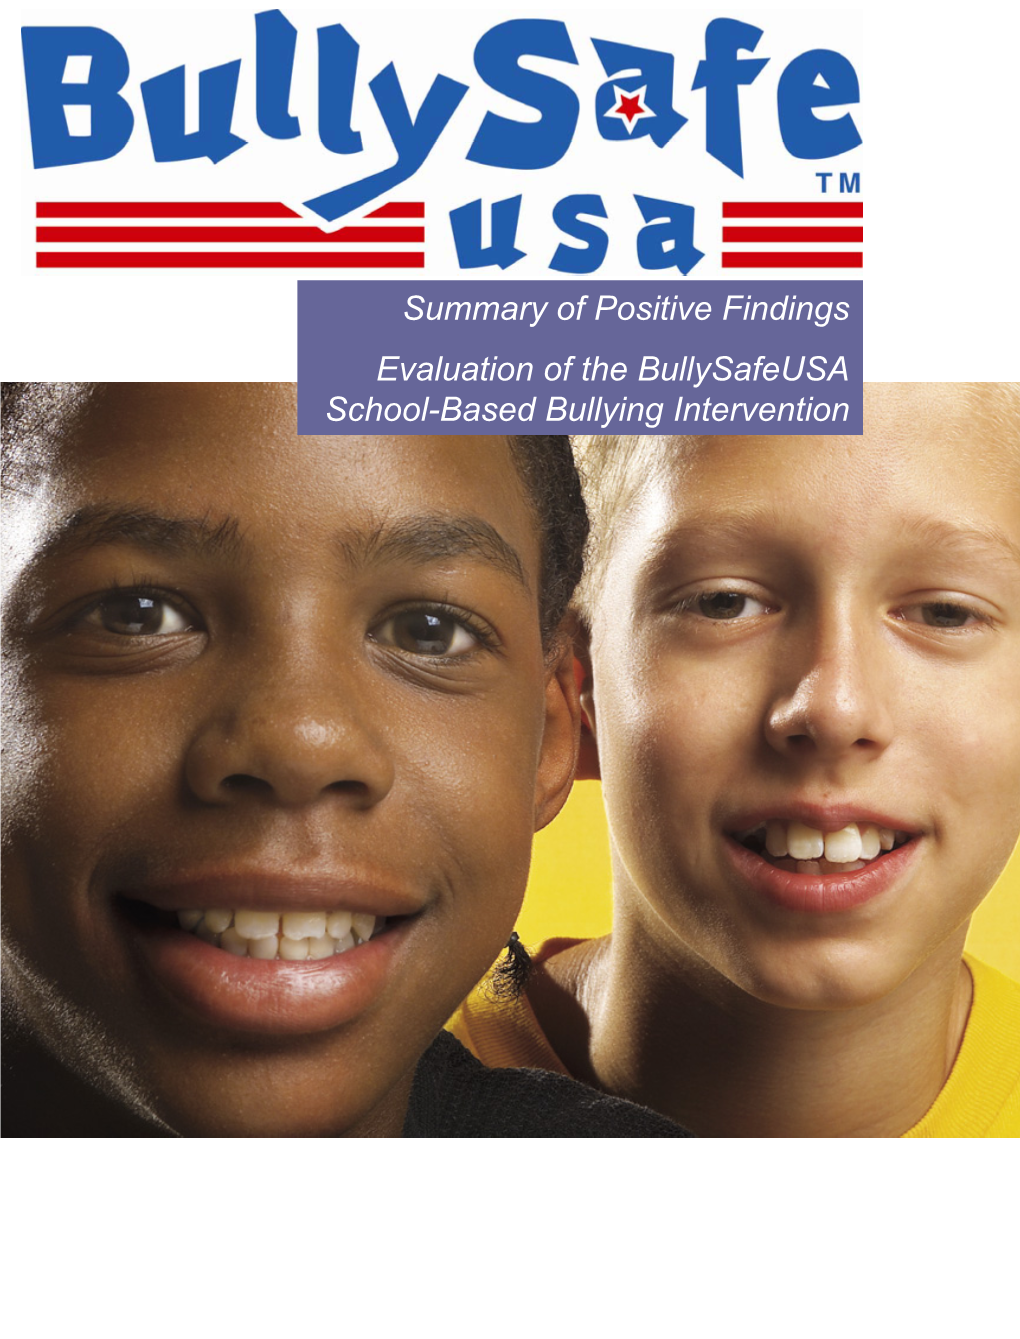 Summary of Positive Findings Evaluation of the Bullysafeusa School-Based Bullying Intervention Summary of Positive Evaluation Findings